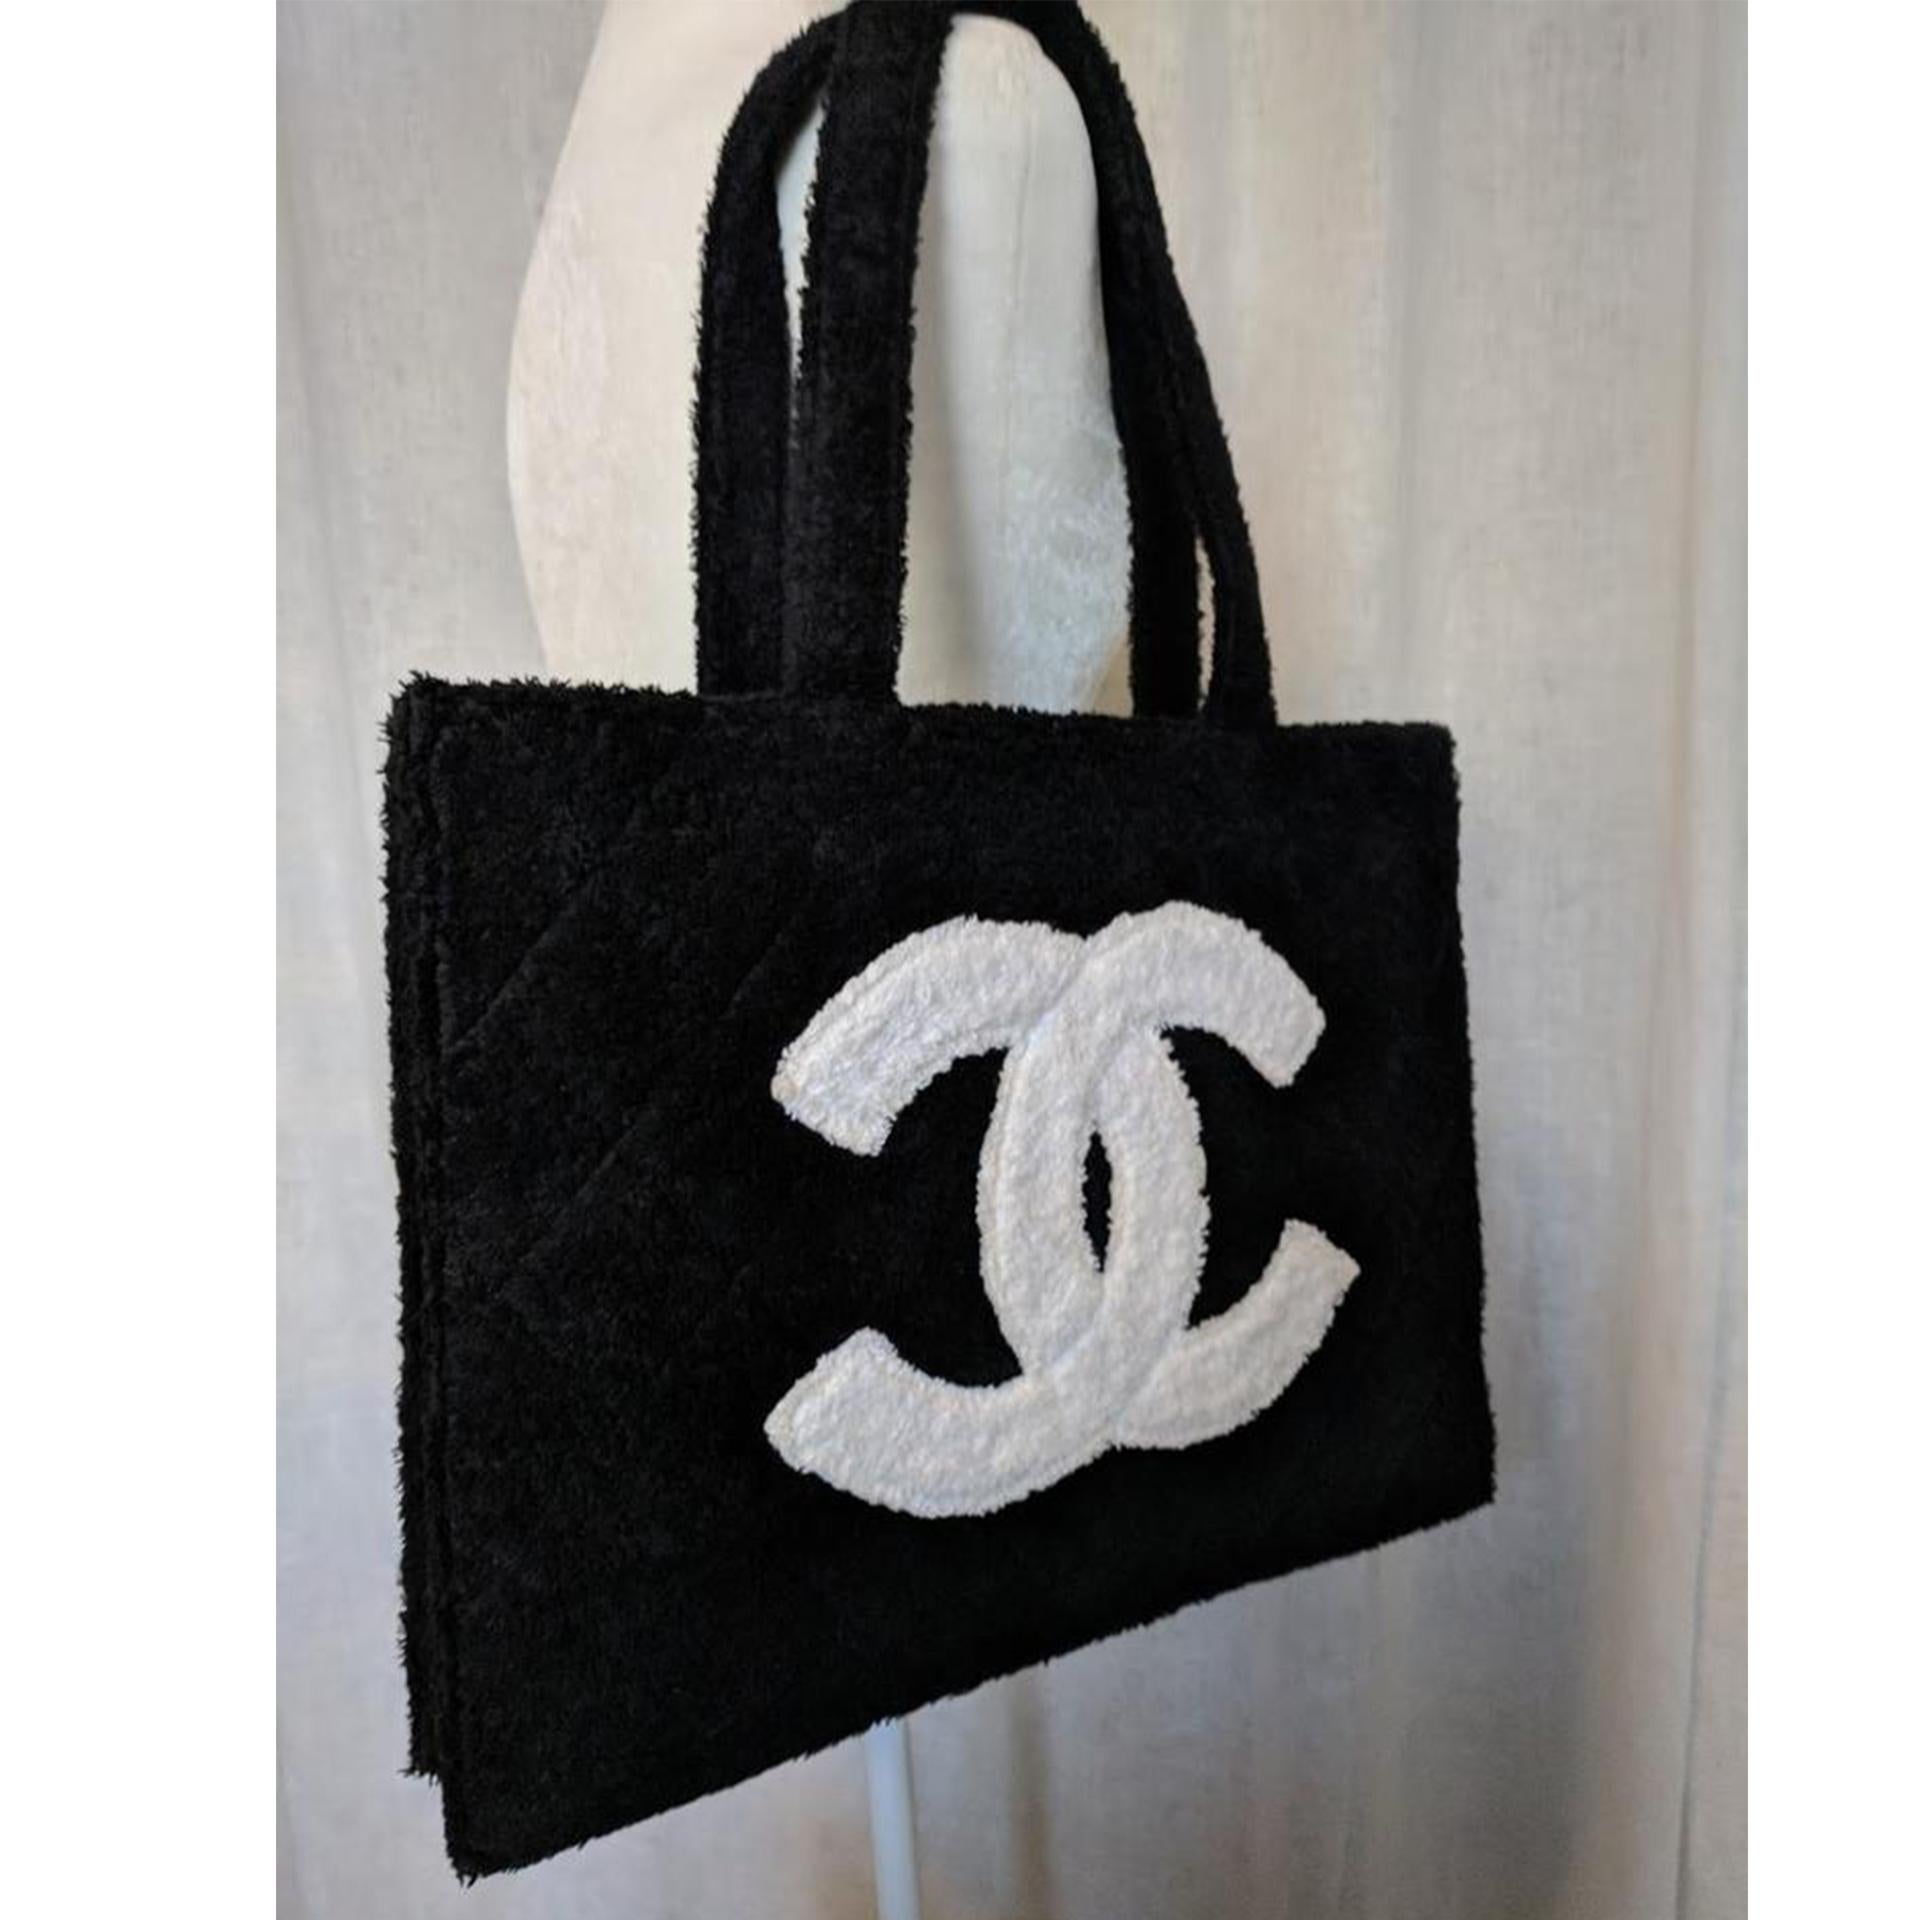 Chanel Timeless Vintage Cc Tote Towel Rare Piece Black Terry Cloth Beach Bag For Sale 3